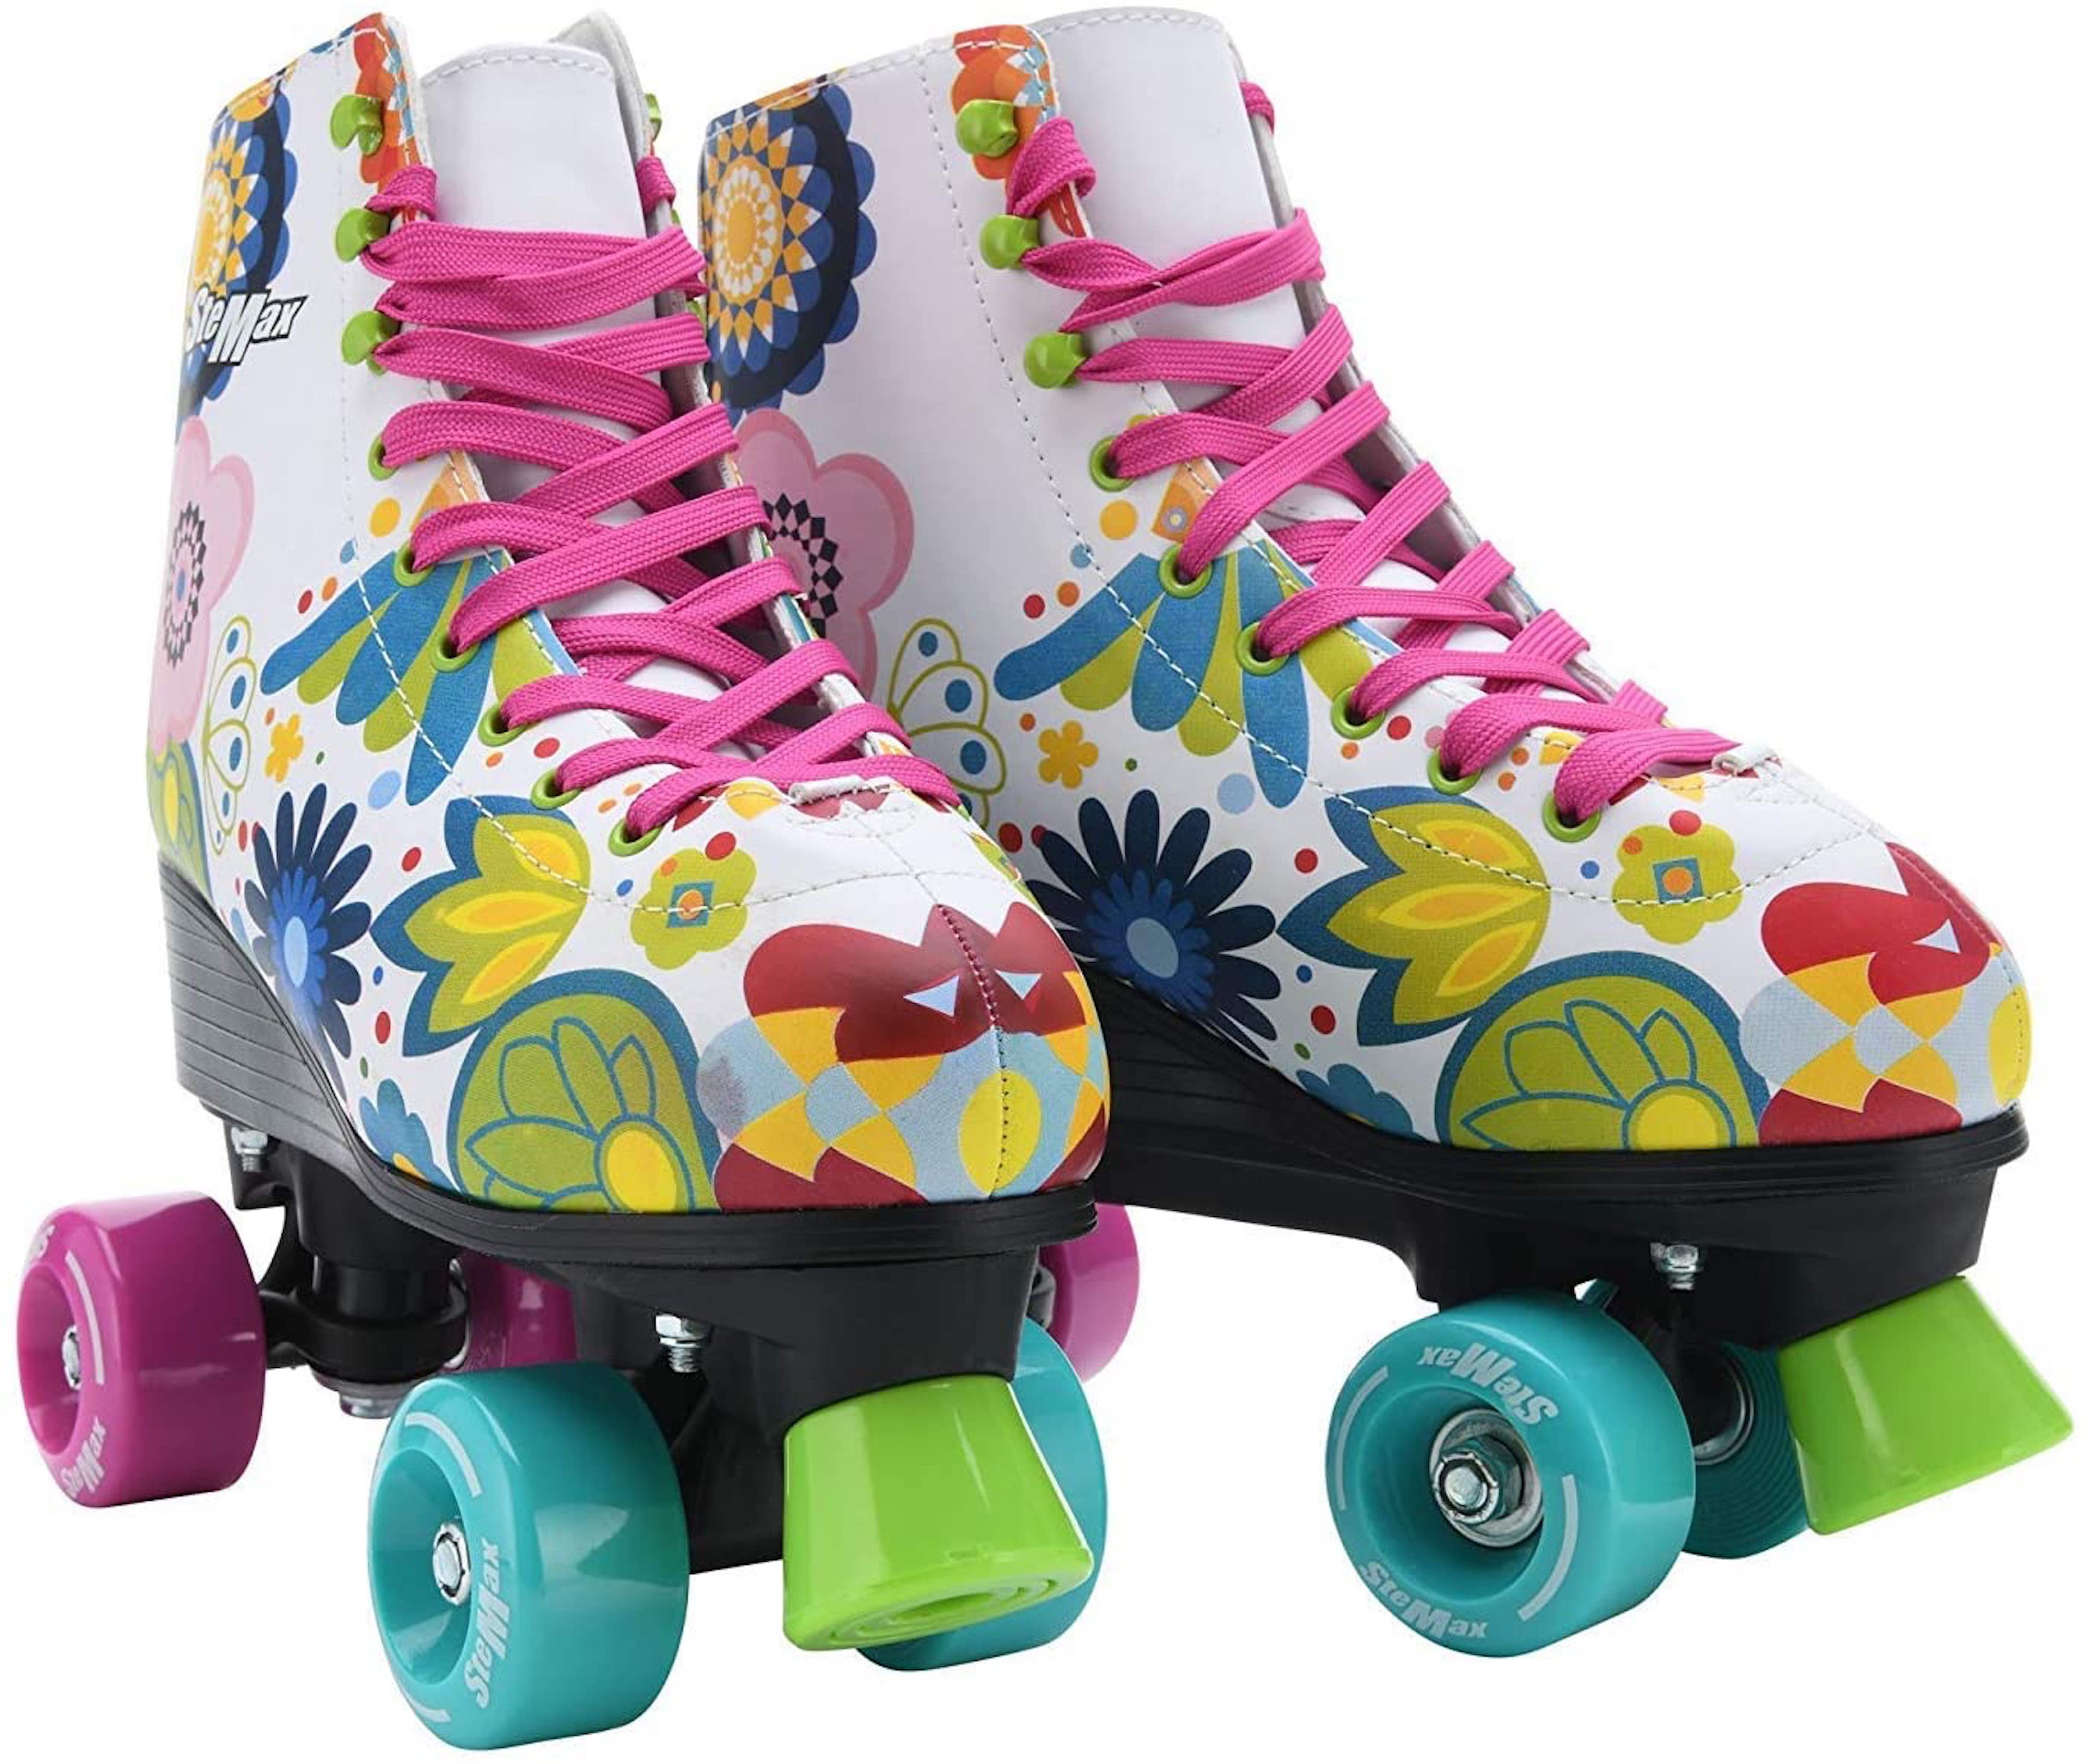 Details about   Classic Roller Skates,Women's Roller Skates High-top,Roller Skates Four-Wheel 